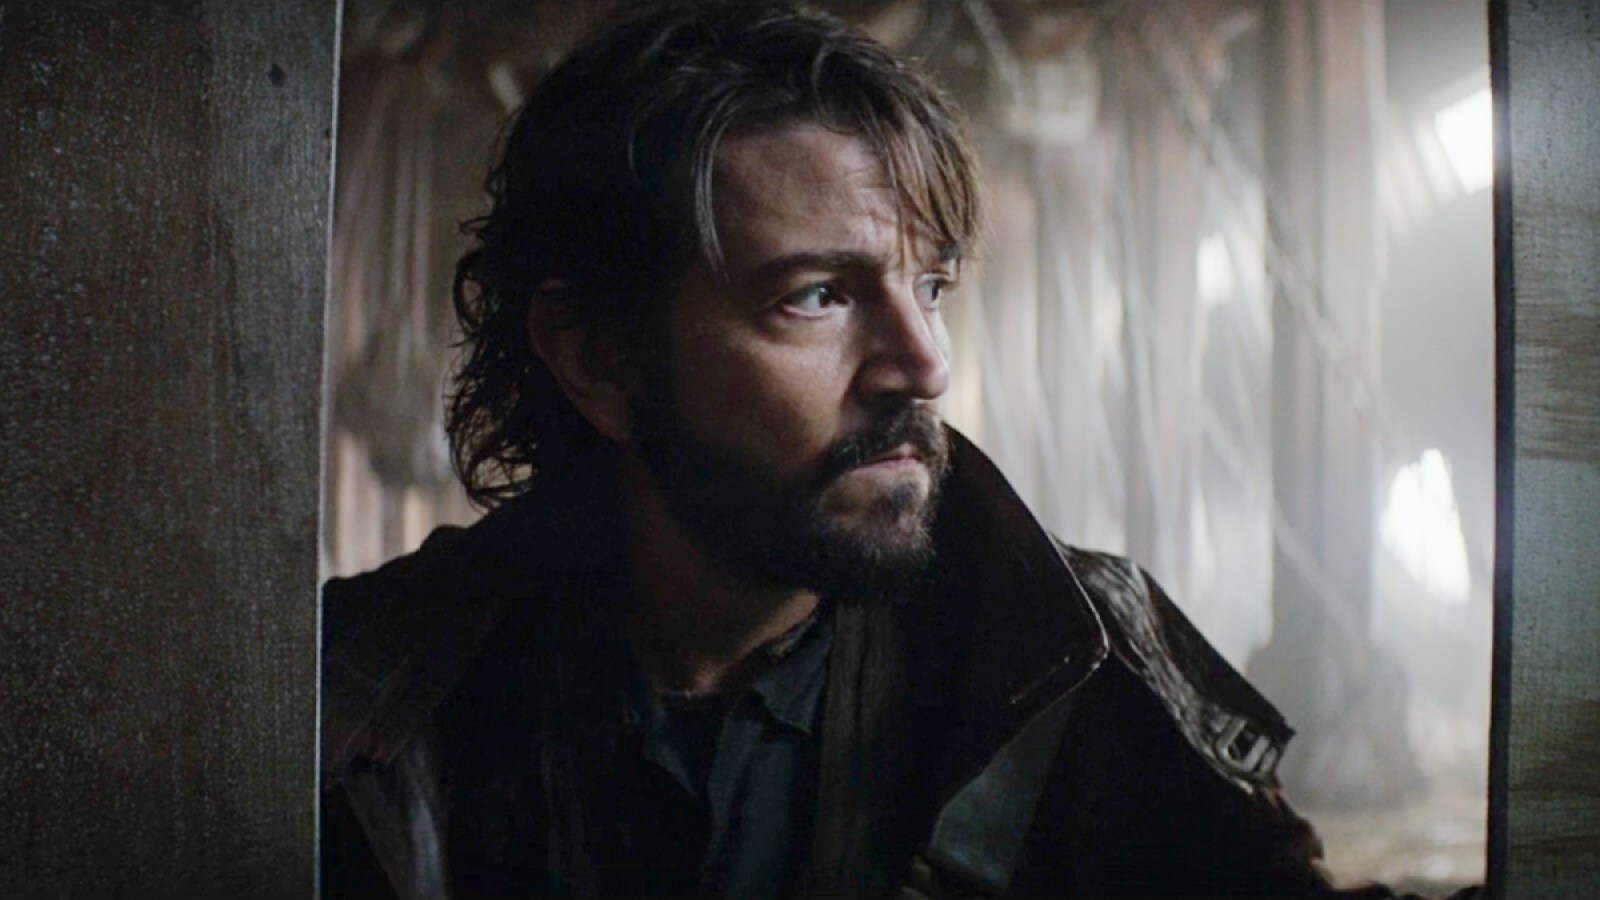 Diego Luna as Cassian Andor in the Star Wars: Rogue One prequel series Andor